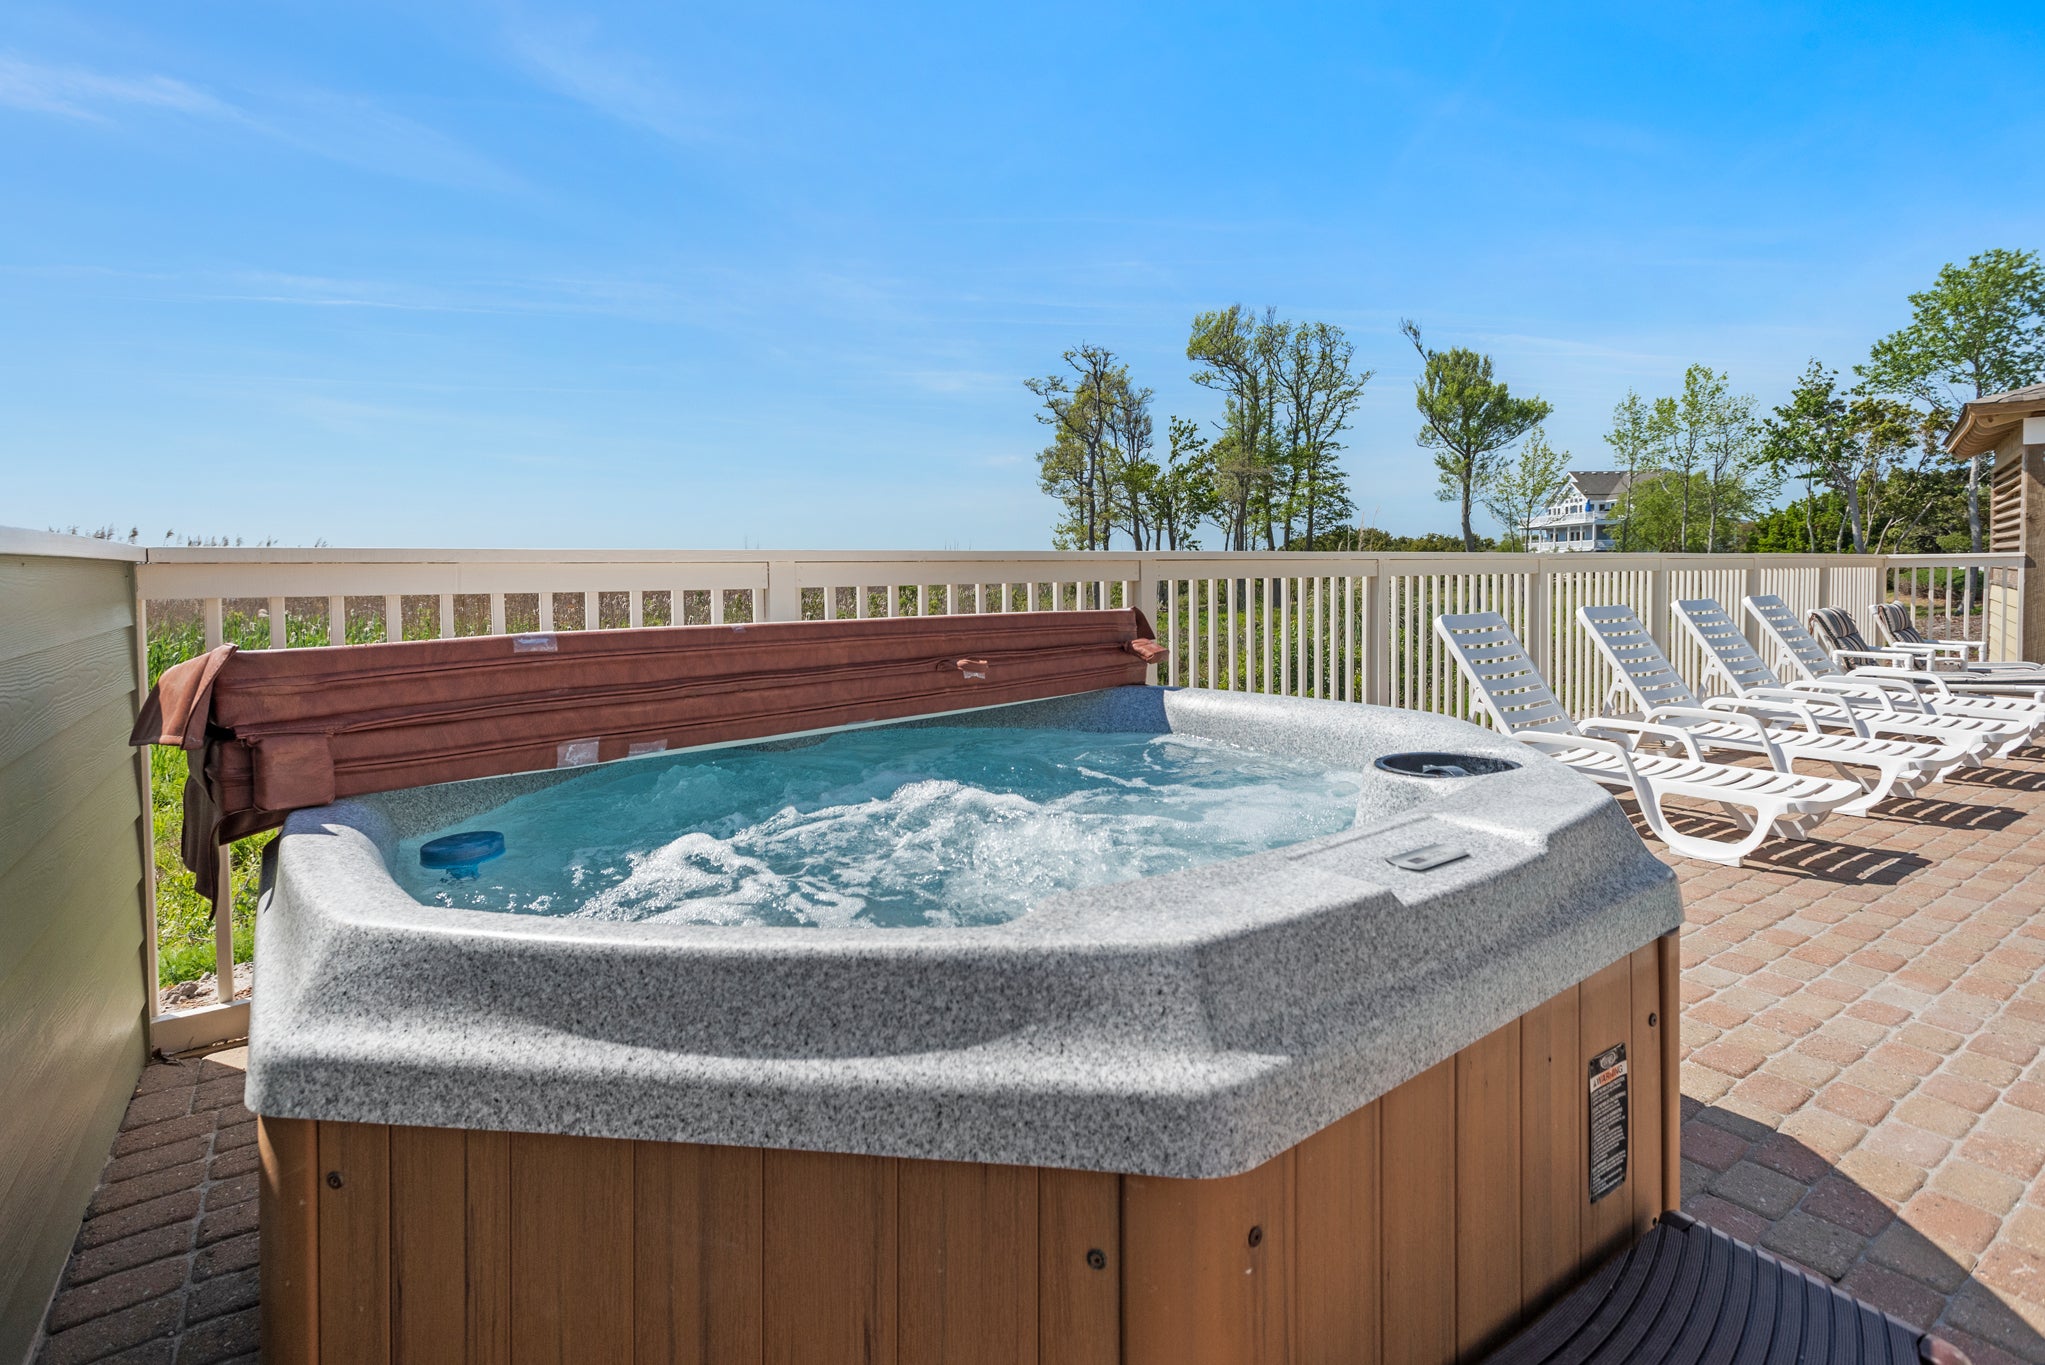 CC009: All About The View | Pool Area w/ Hot Tub